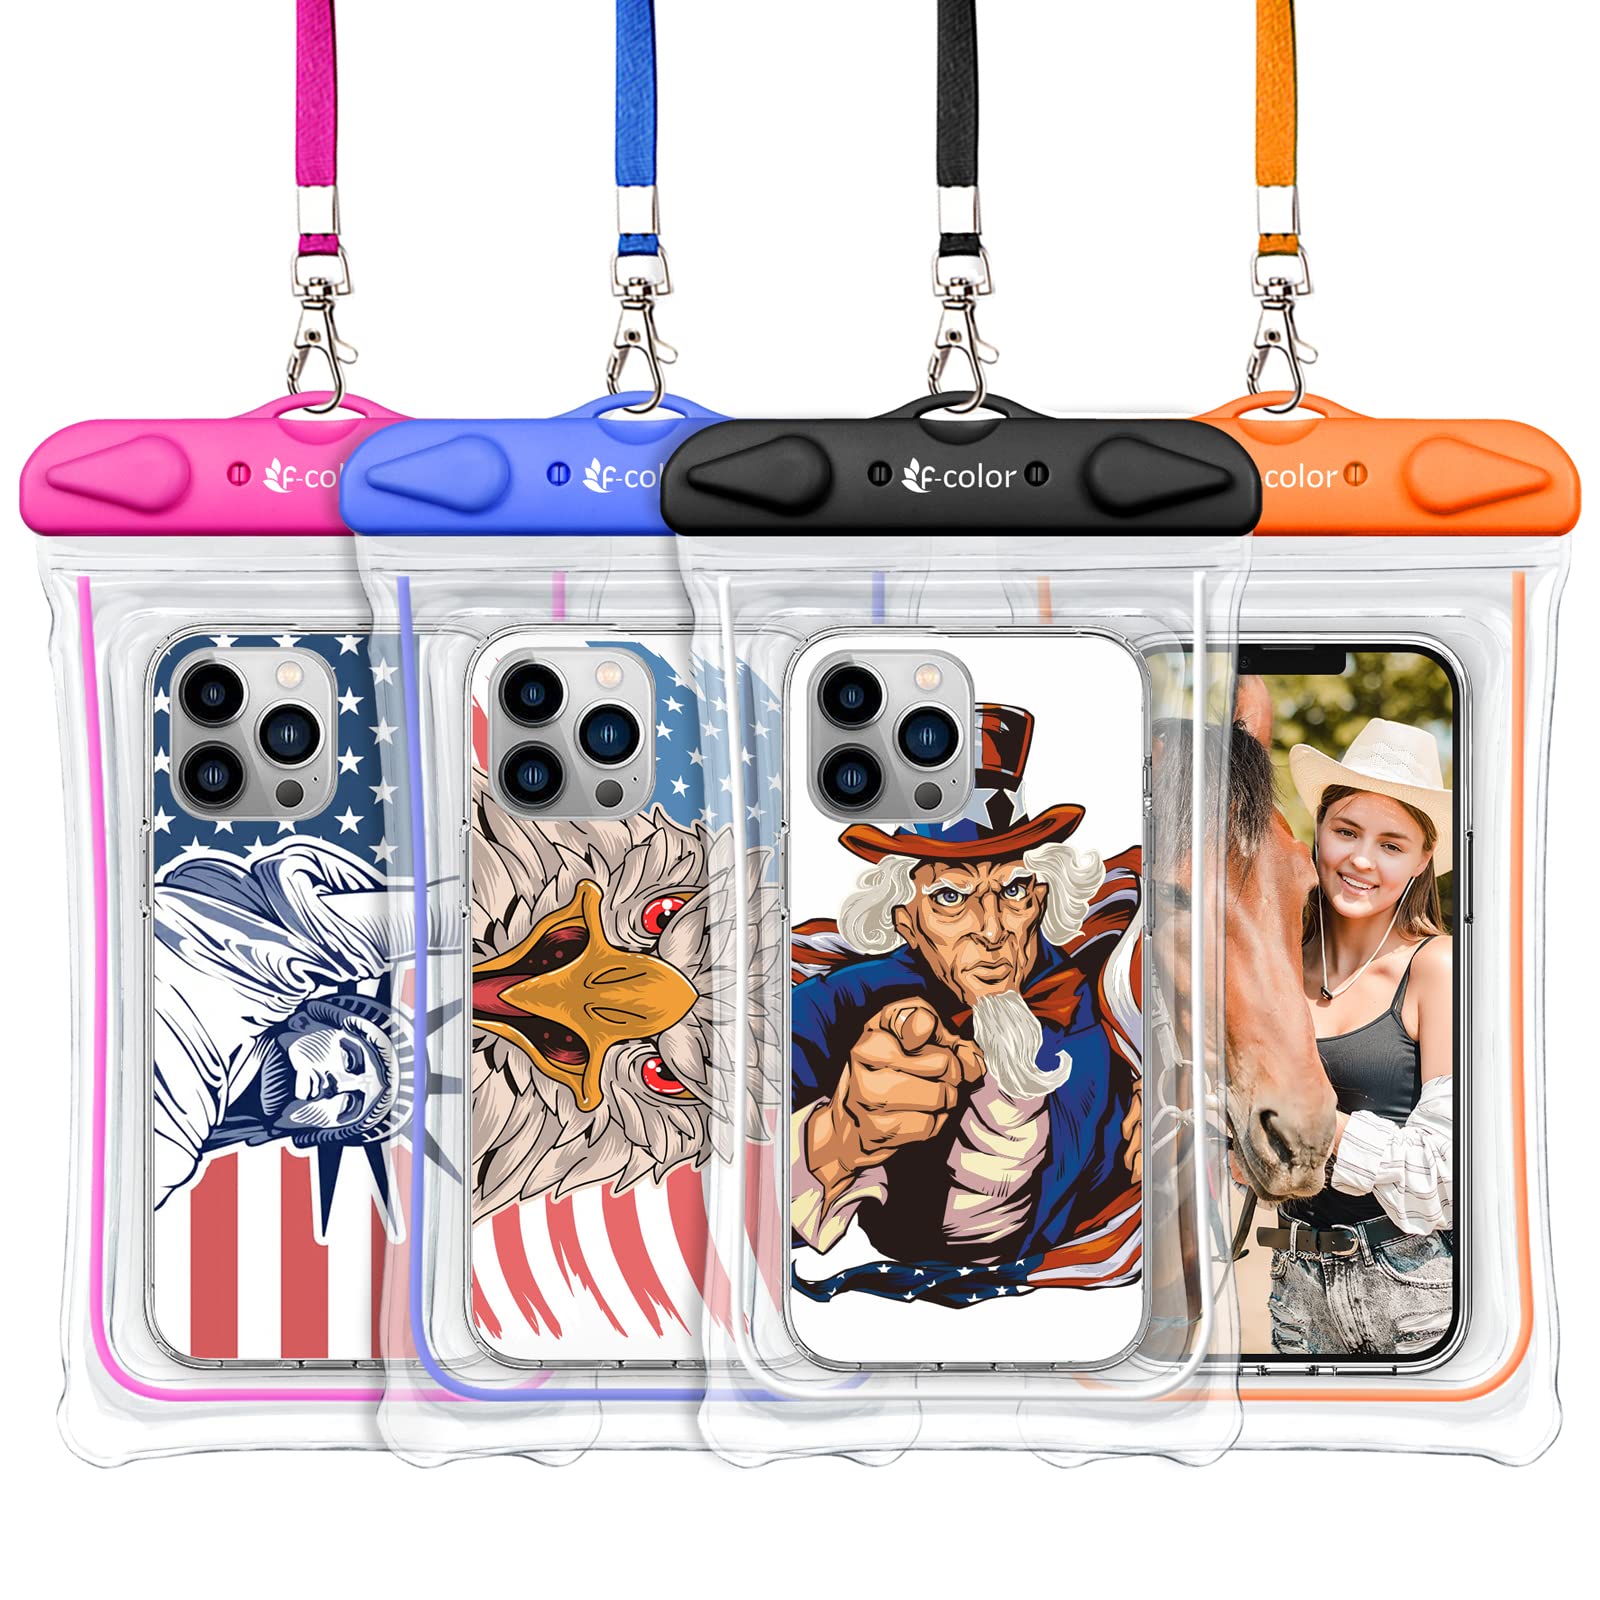 Book Cover Waterproof Case, 4 Pack F-color Floating Clear Waterproof Phone Pouch TPU Dry Case Compatible iPhone X 8 7 7 Plus Home Button for iPhone, Google Pixel, Samsung, HTC, LG, Blue Black Orange Pink